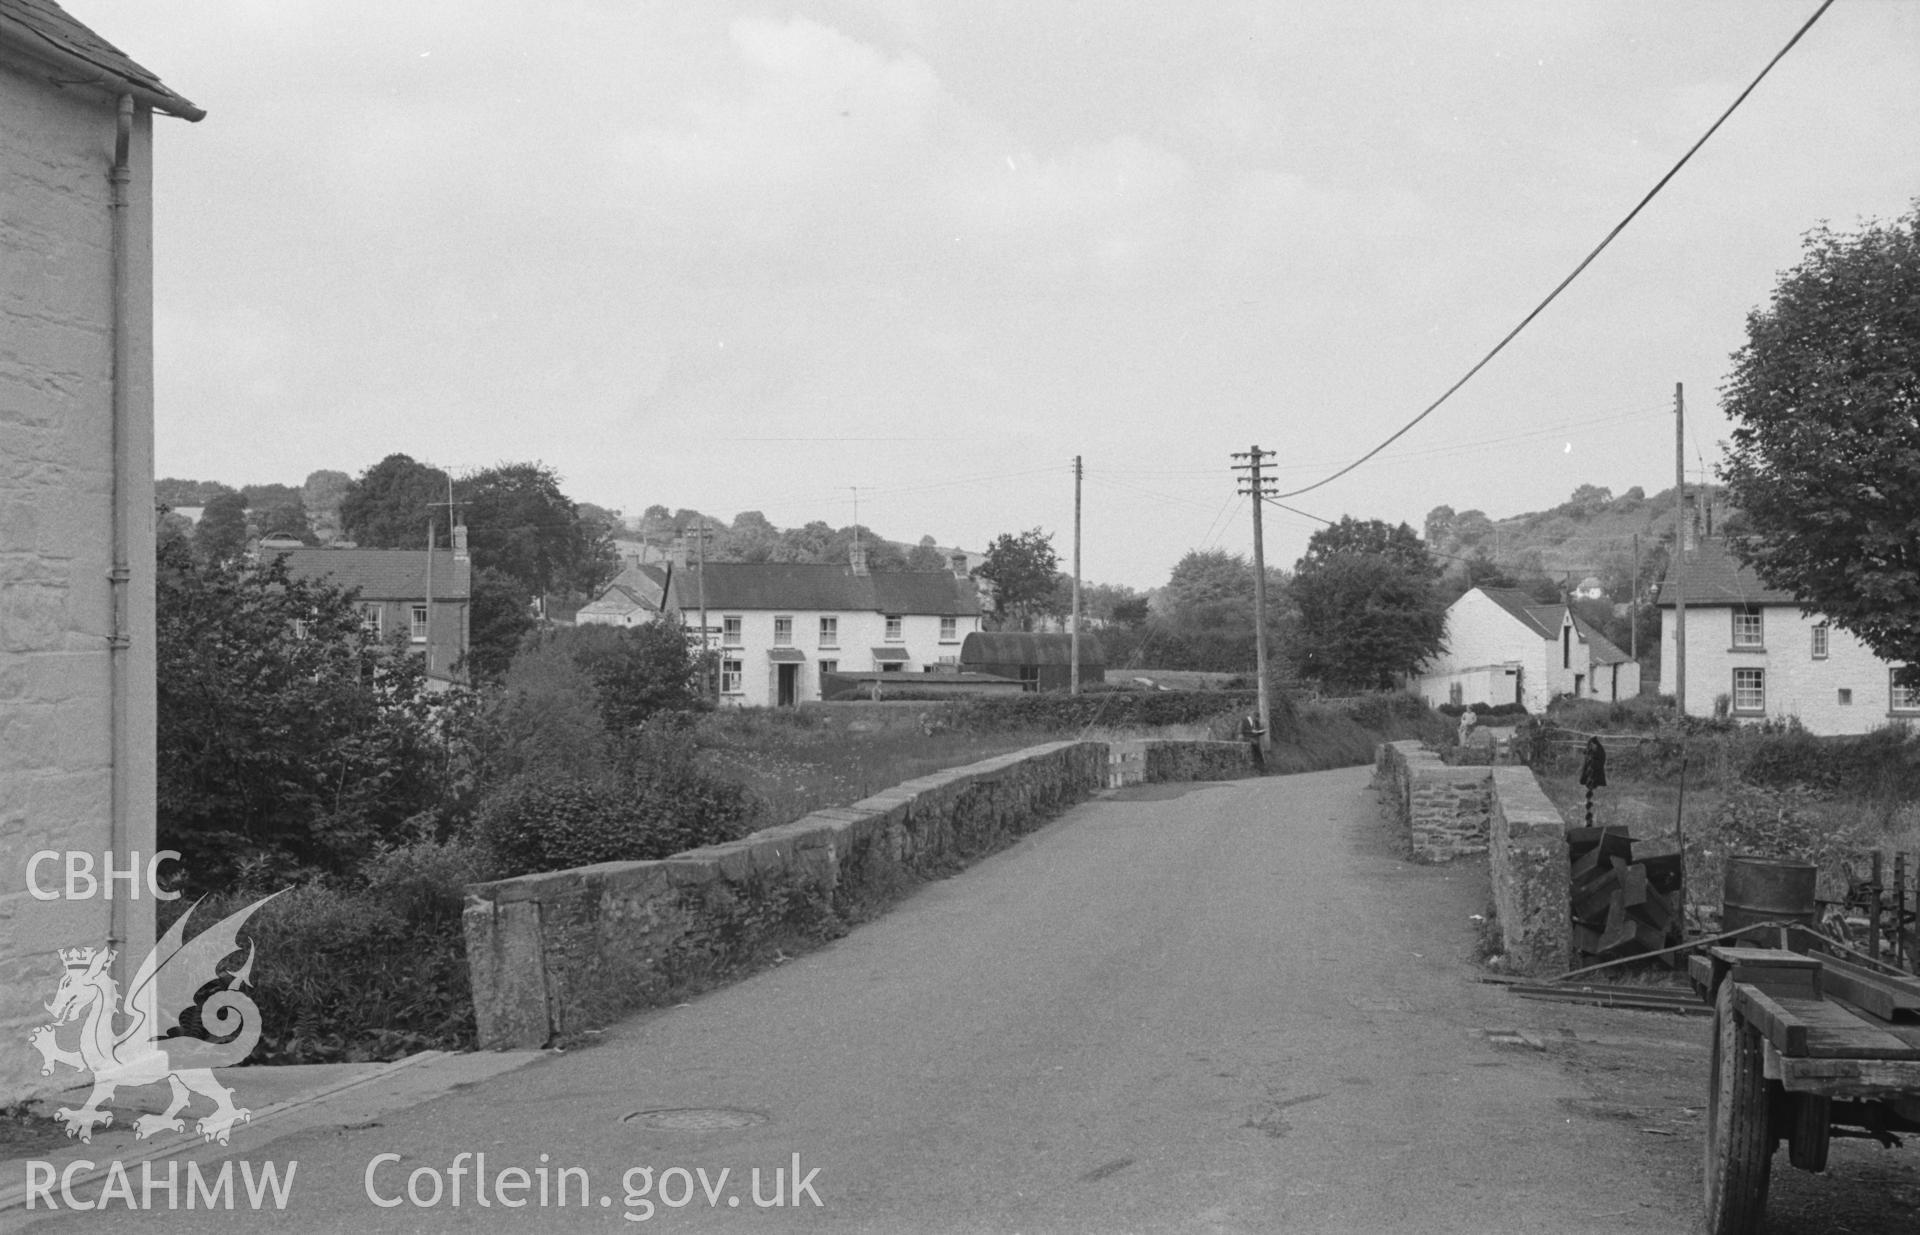 Digital copy of black & white negative showing view across the bridge over the Clettwr Fawr towards Post Office at Talgarreg. Photographed by Arthur O. Chater in August 1965 looking north west from Grid Reference SN 4256 5116. Bridge destroyed c. 1977.